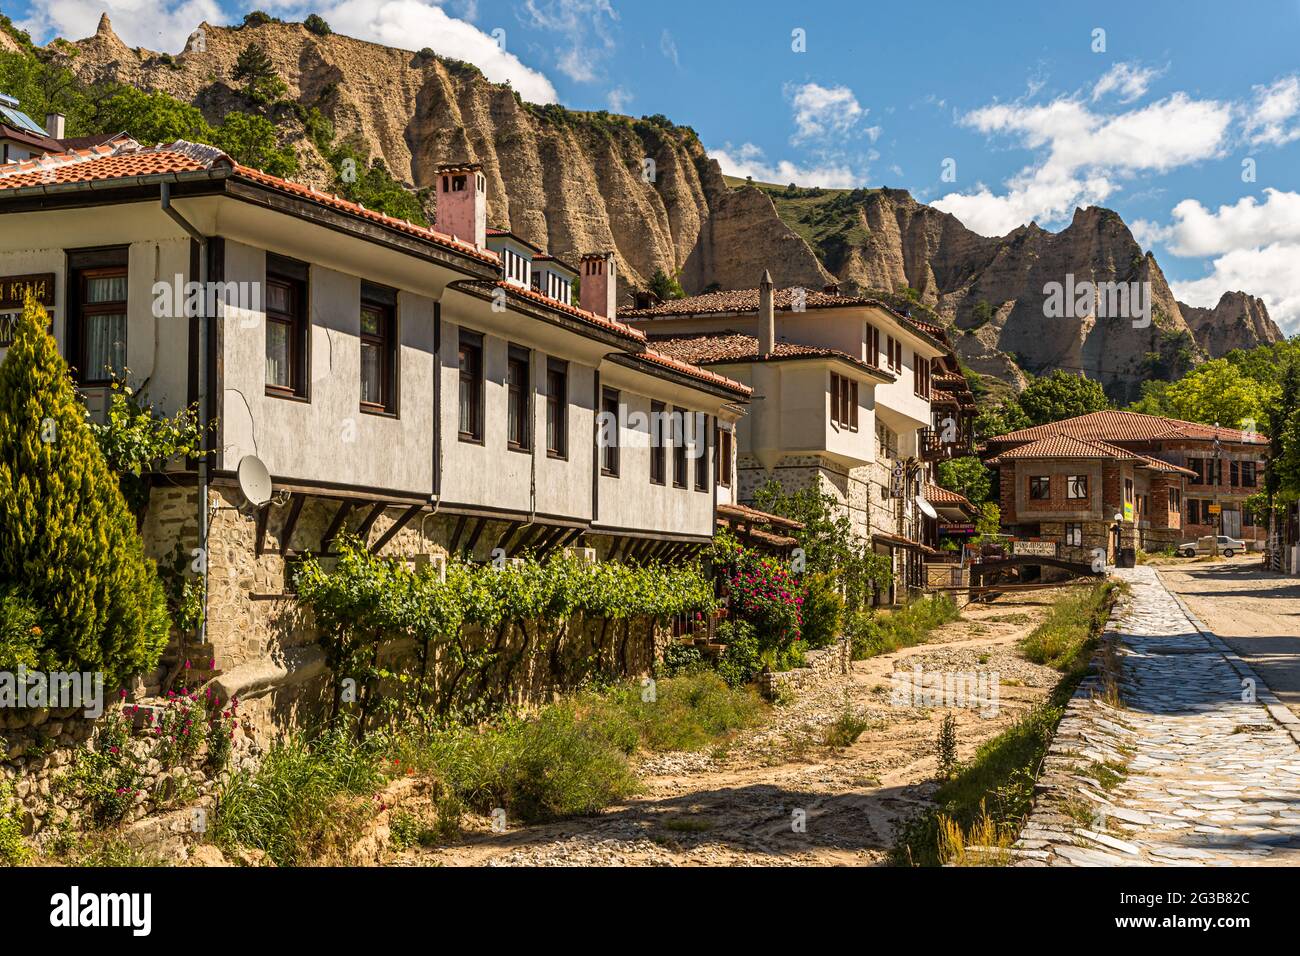 With 160 inhabitants, the town of Melnik is considered the smallest town in Bulgaria. The houses are characterized by the architecture of the Bulgarian National Revival style with cantilevered residential upper floors and a floor below, where the wine can mature at a constant cool temperature Stock Photo